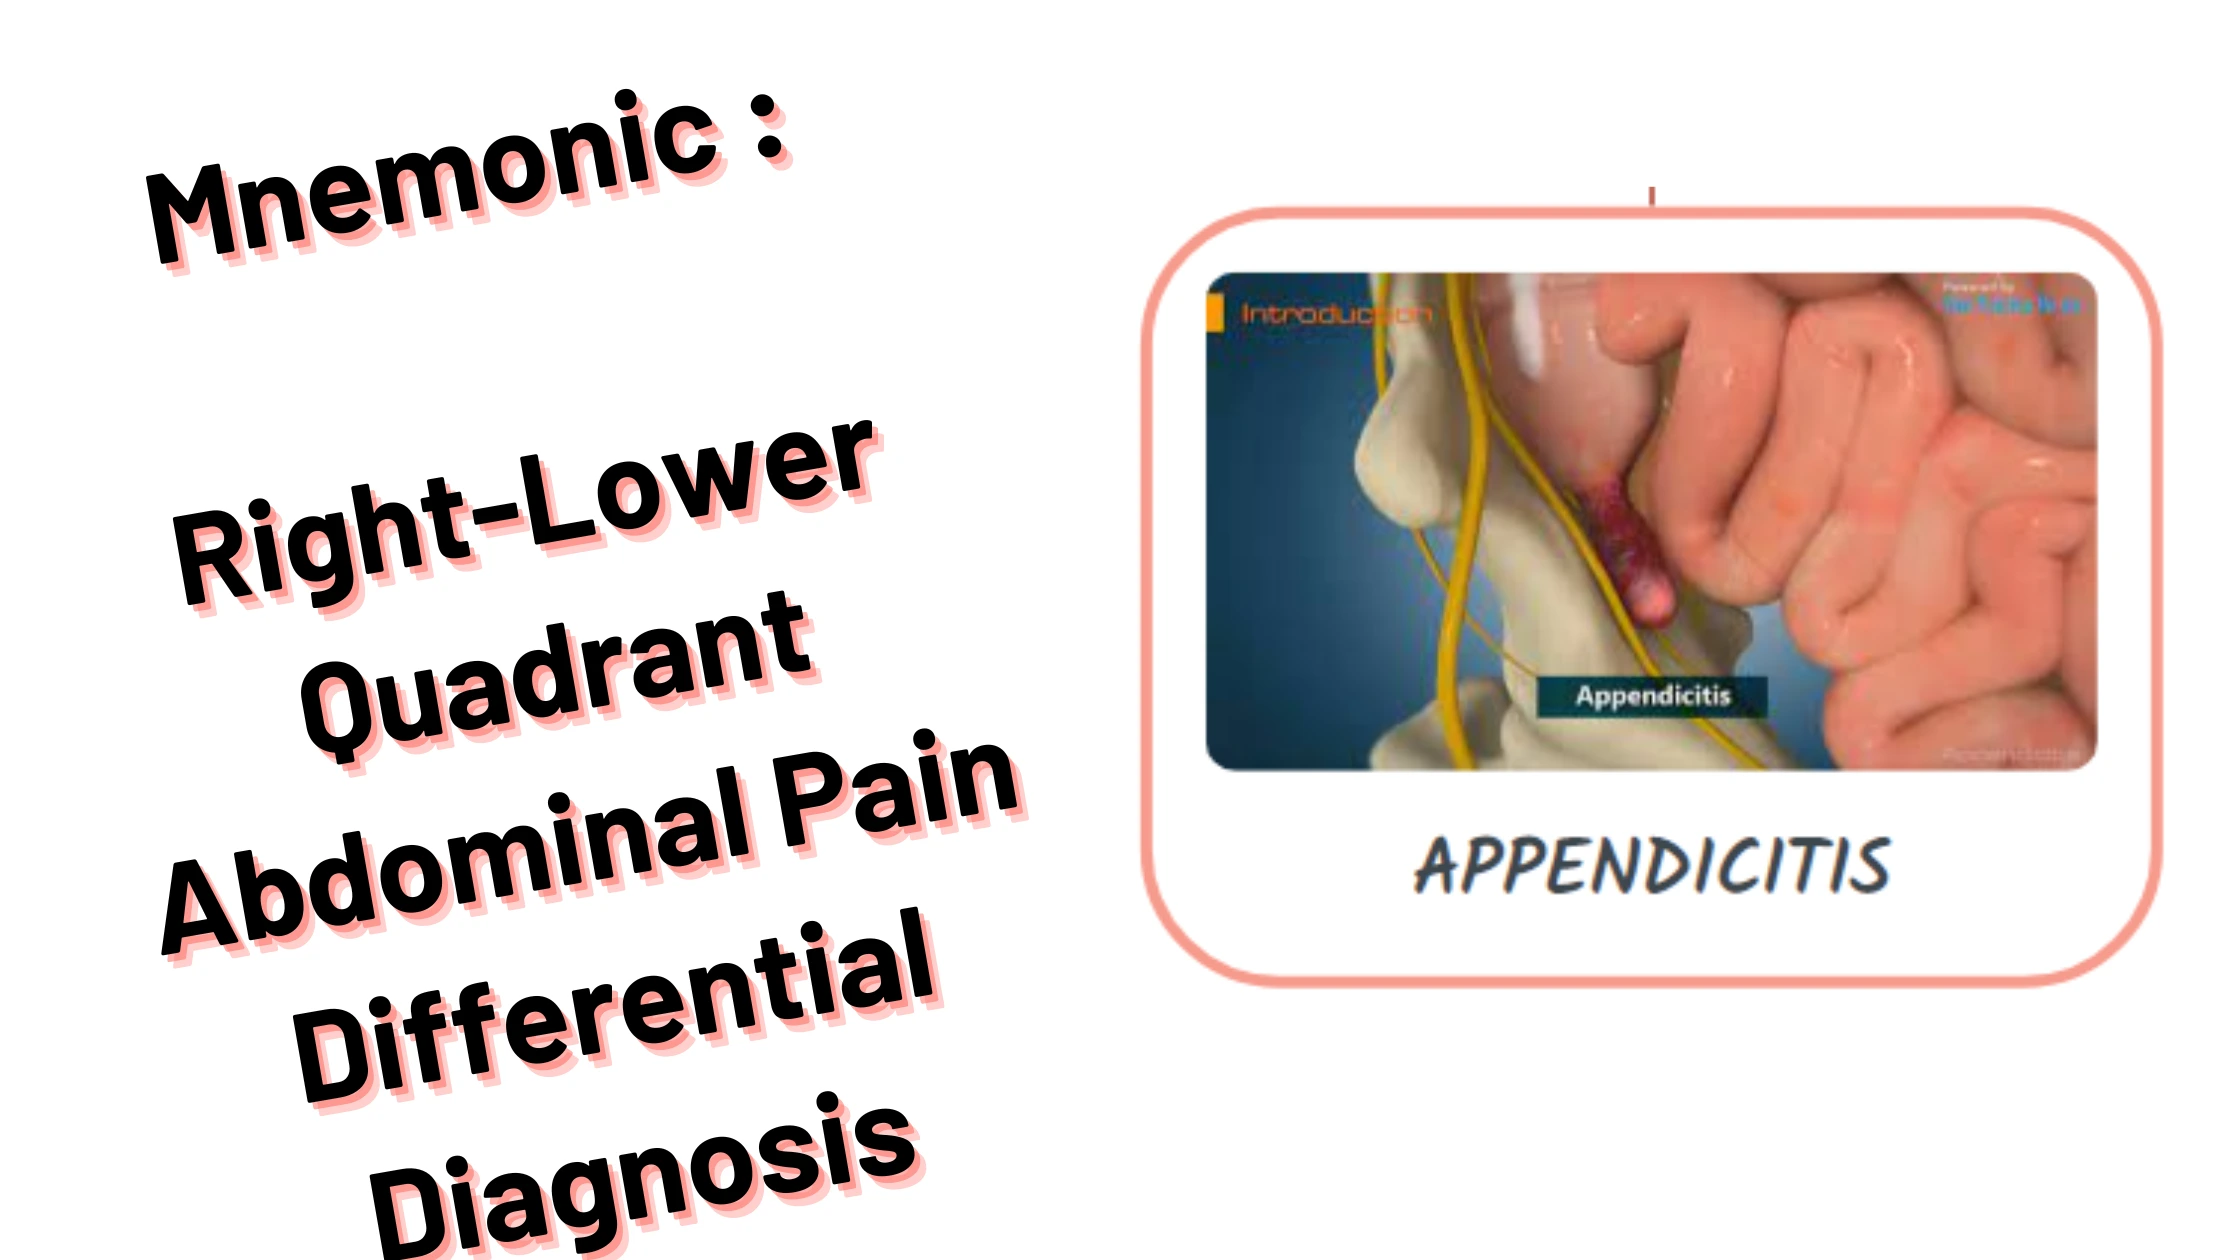 Right-Lower Quadrant Abdominal Pain Differential Diagnosis Medical Mnemonics